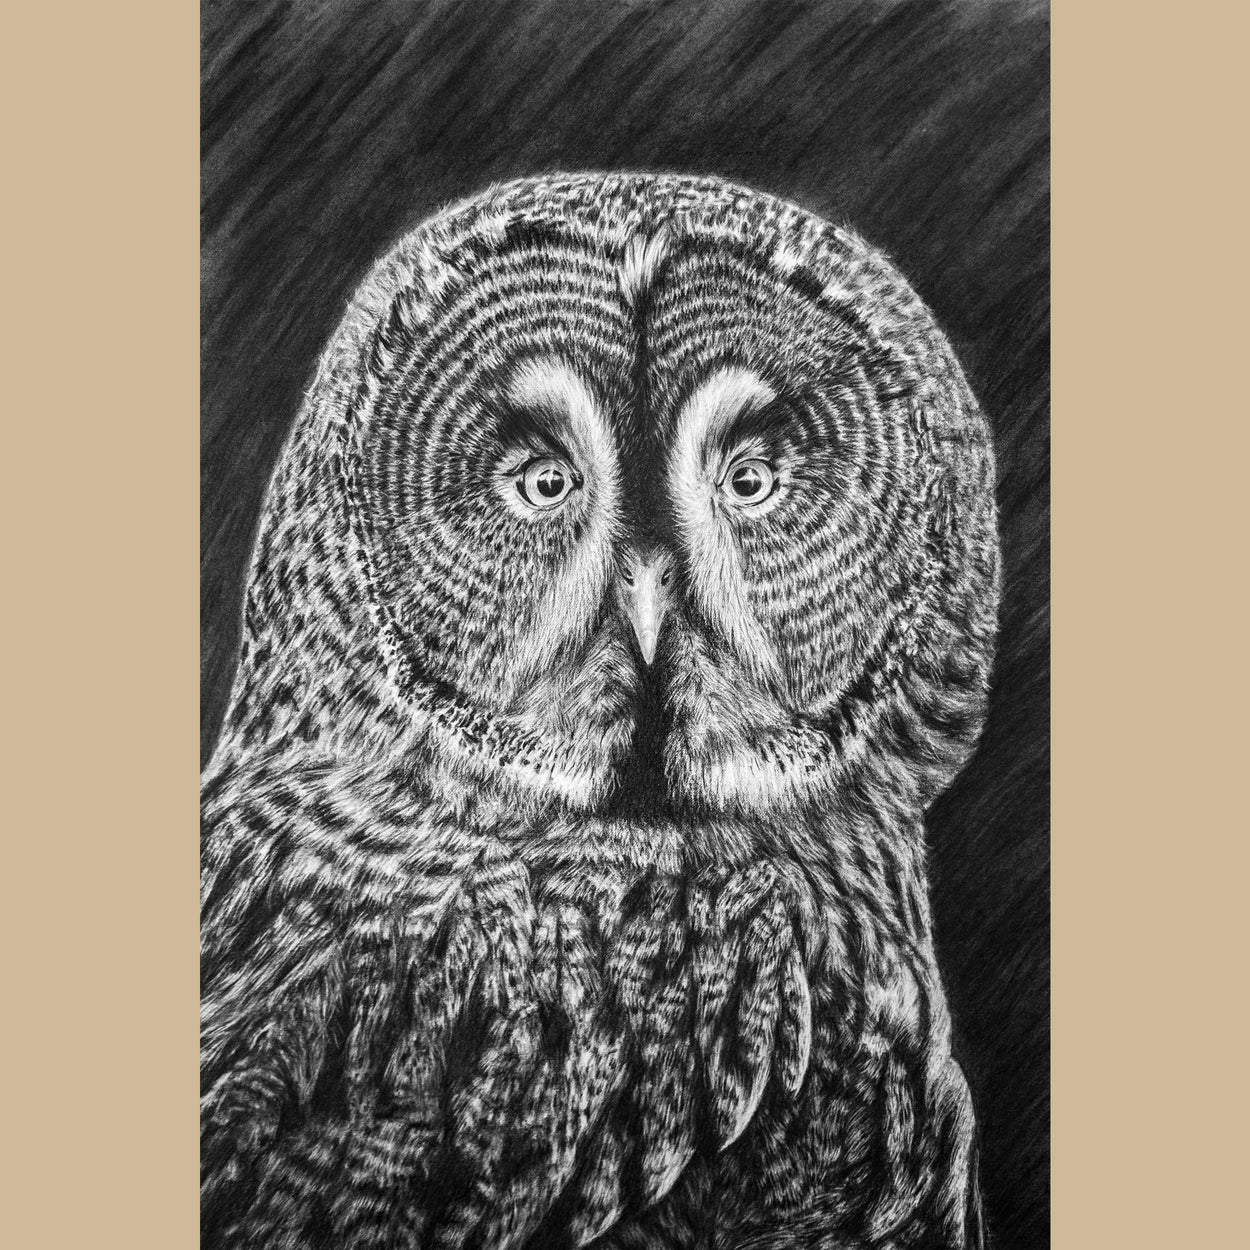 Charcoal drawing in black and white of a great grey owl face and shoulders